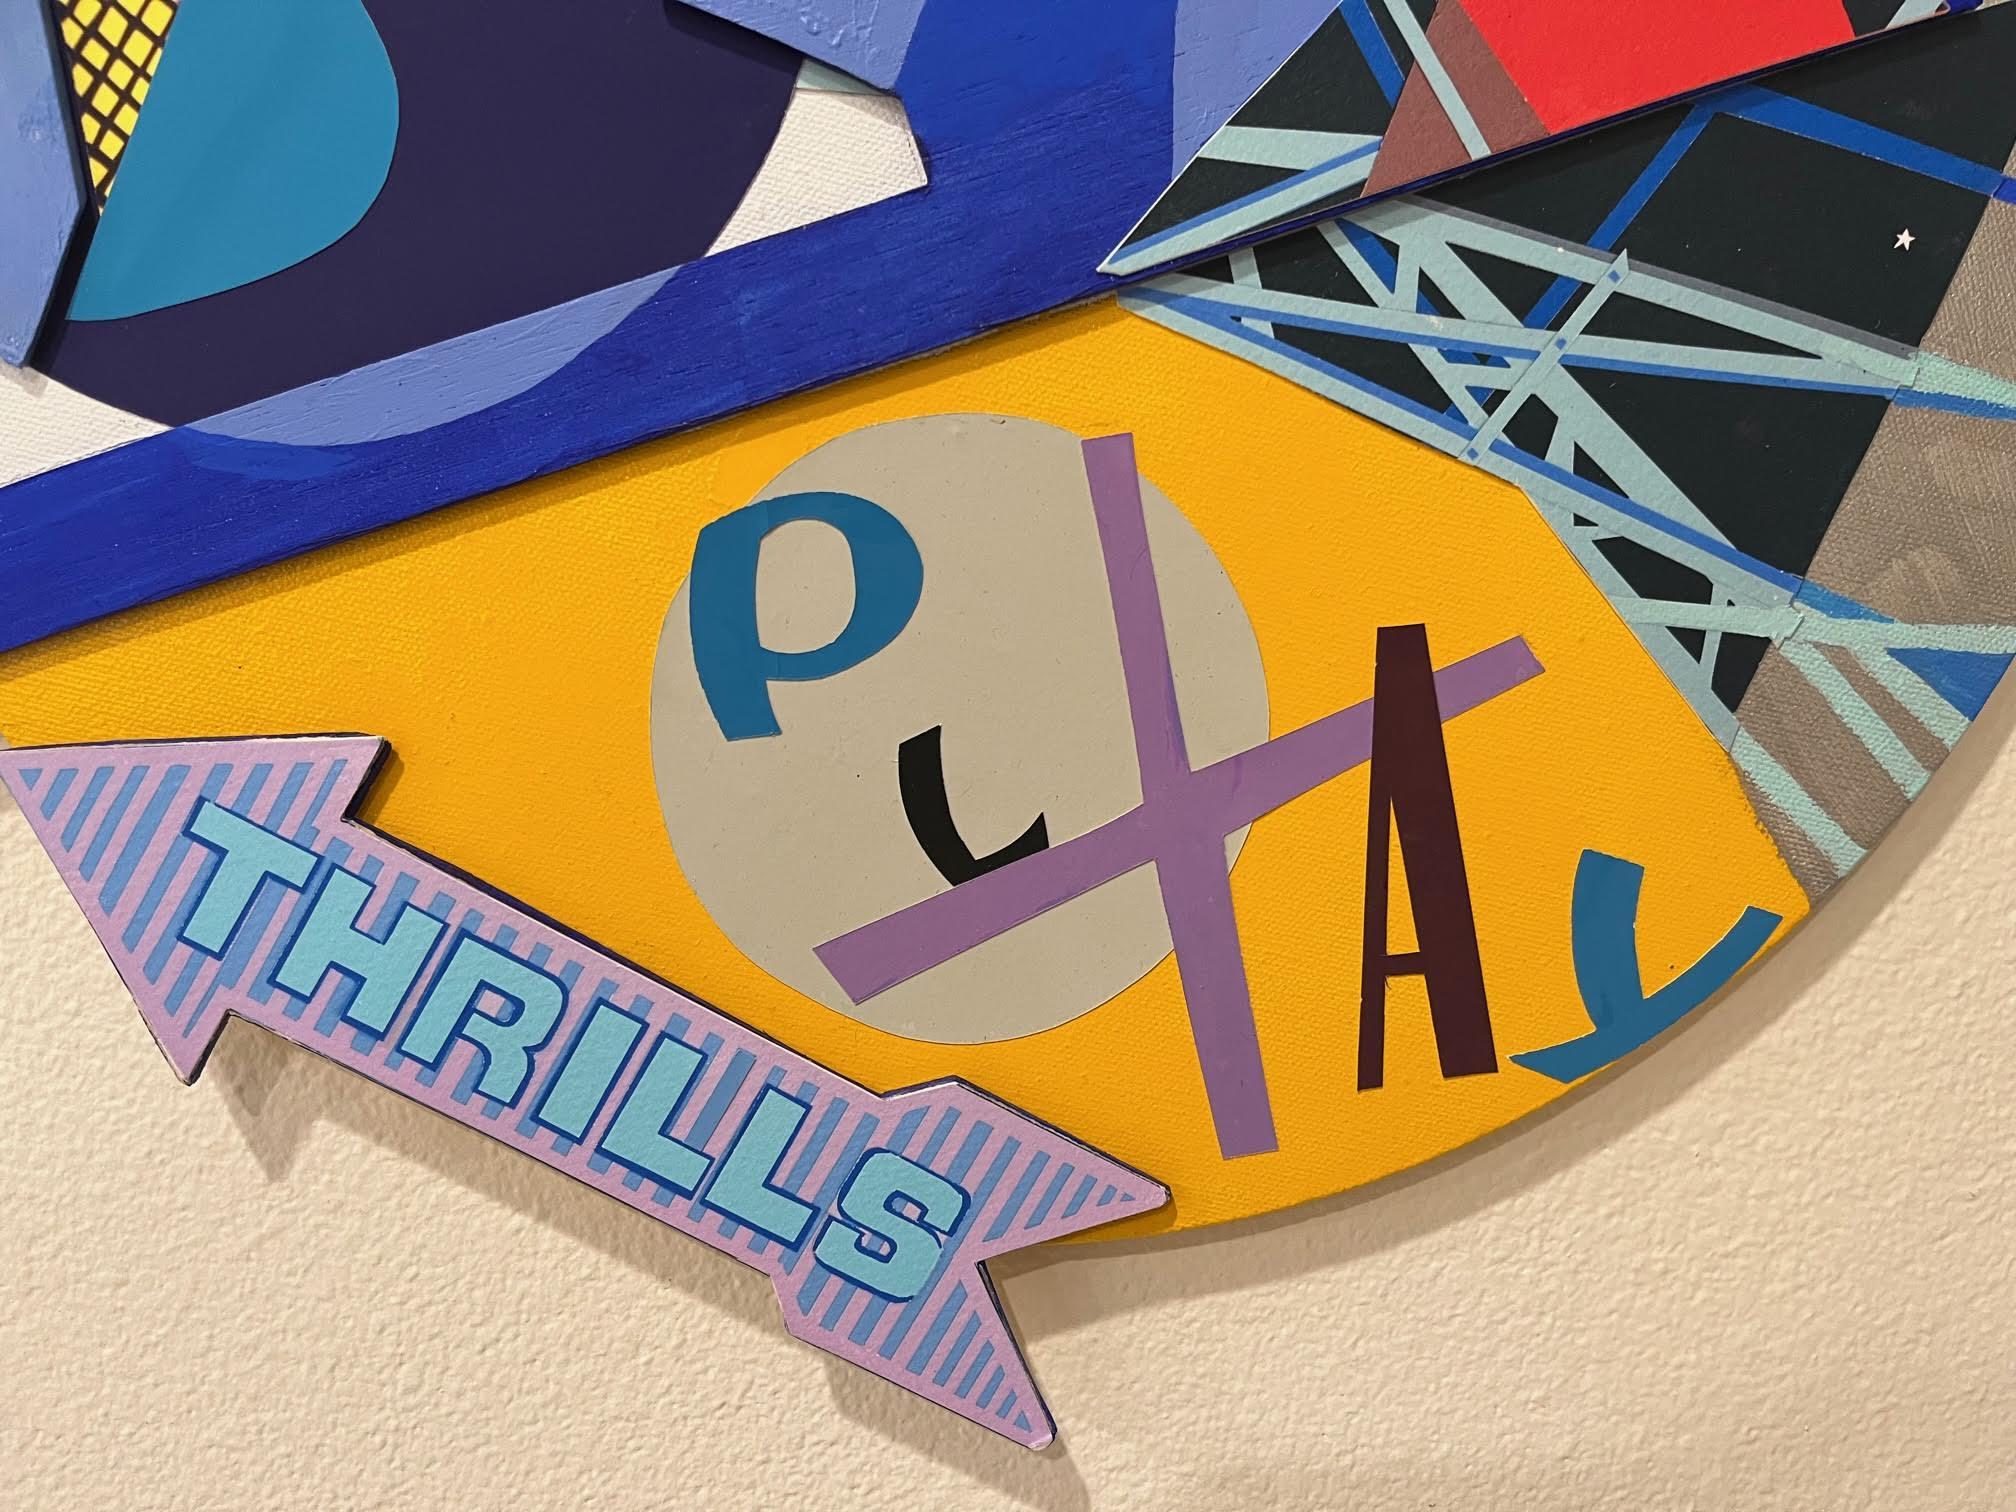 To create PLAY the artist reached back and up cycled materials that she had worked with in the past.  She combined sections of her archival pigment prints collaged with painted wood cut outs on a circle canvas and painted some areas in sign painters